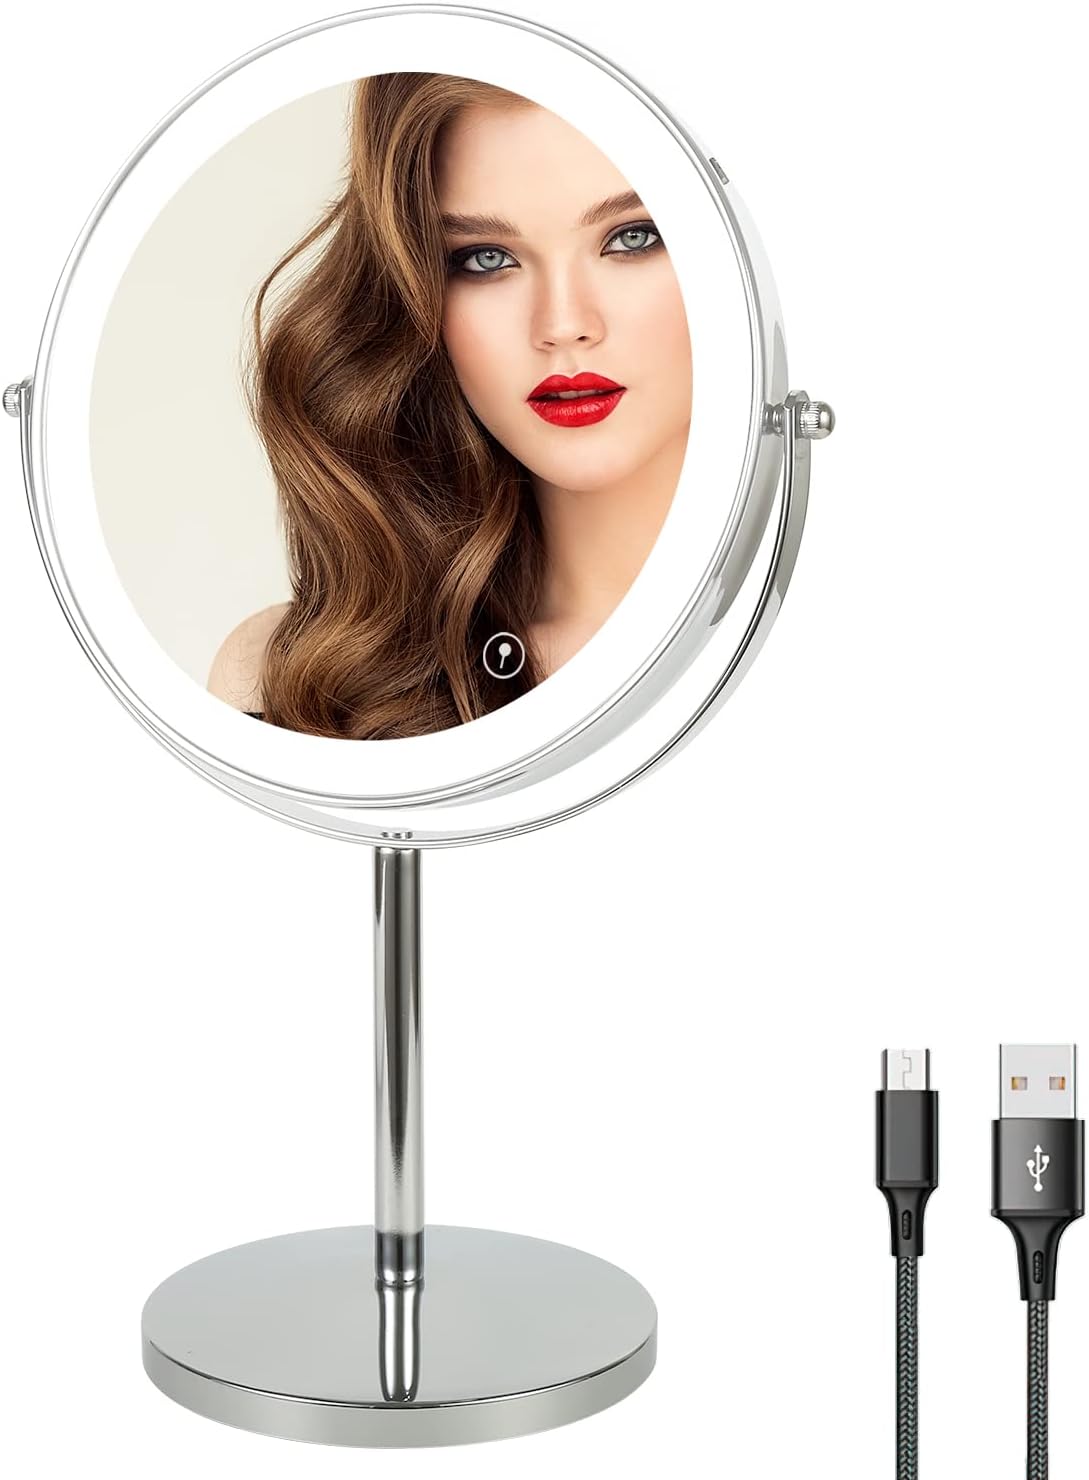  Acoolda Vanity Mirror with Lights, Hollywood Lighted Makeup  Mirror with 3 Color Lighting Modes, Detachable 10X Magnification,  360°Rotation, 14.4Inches, White…